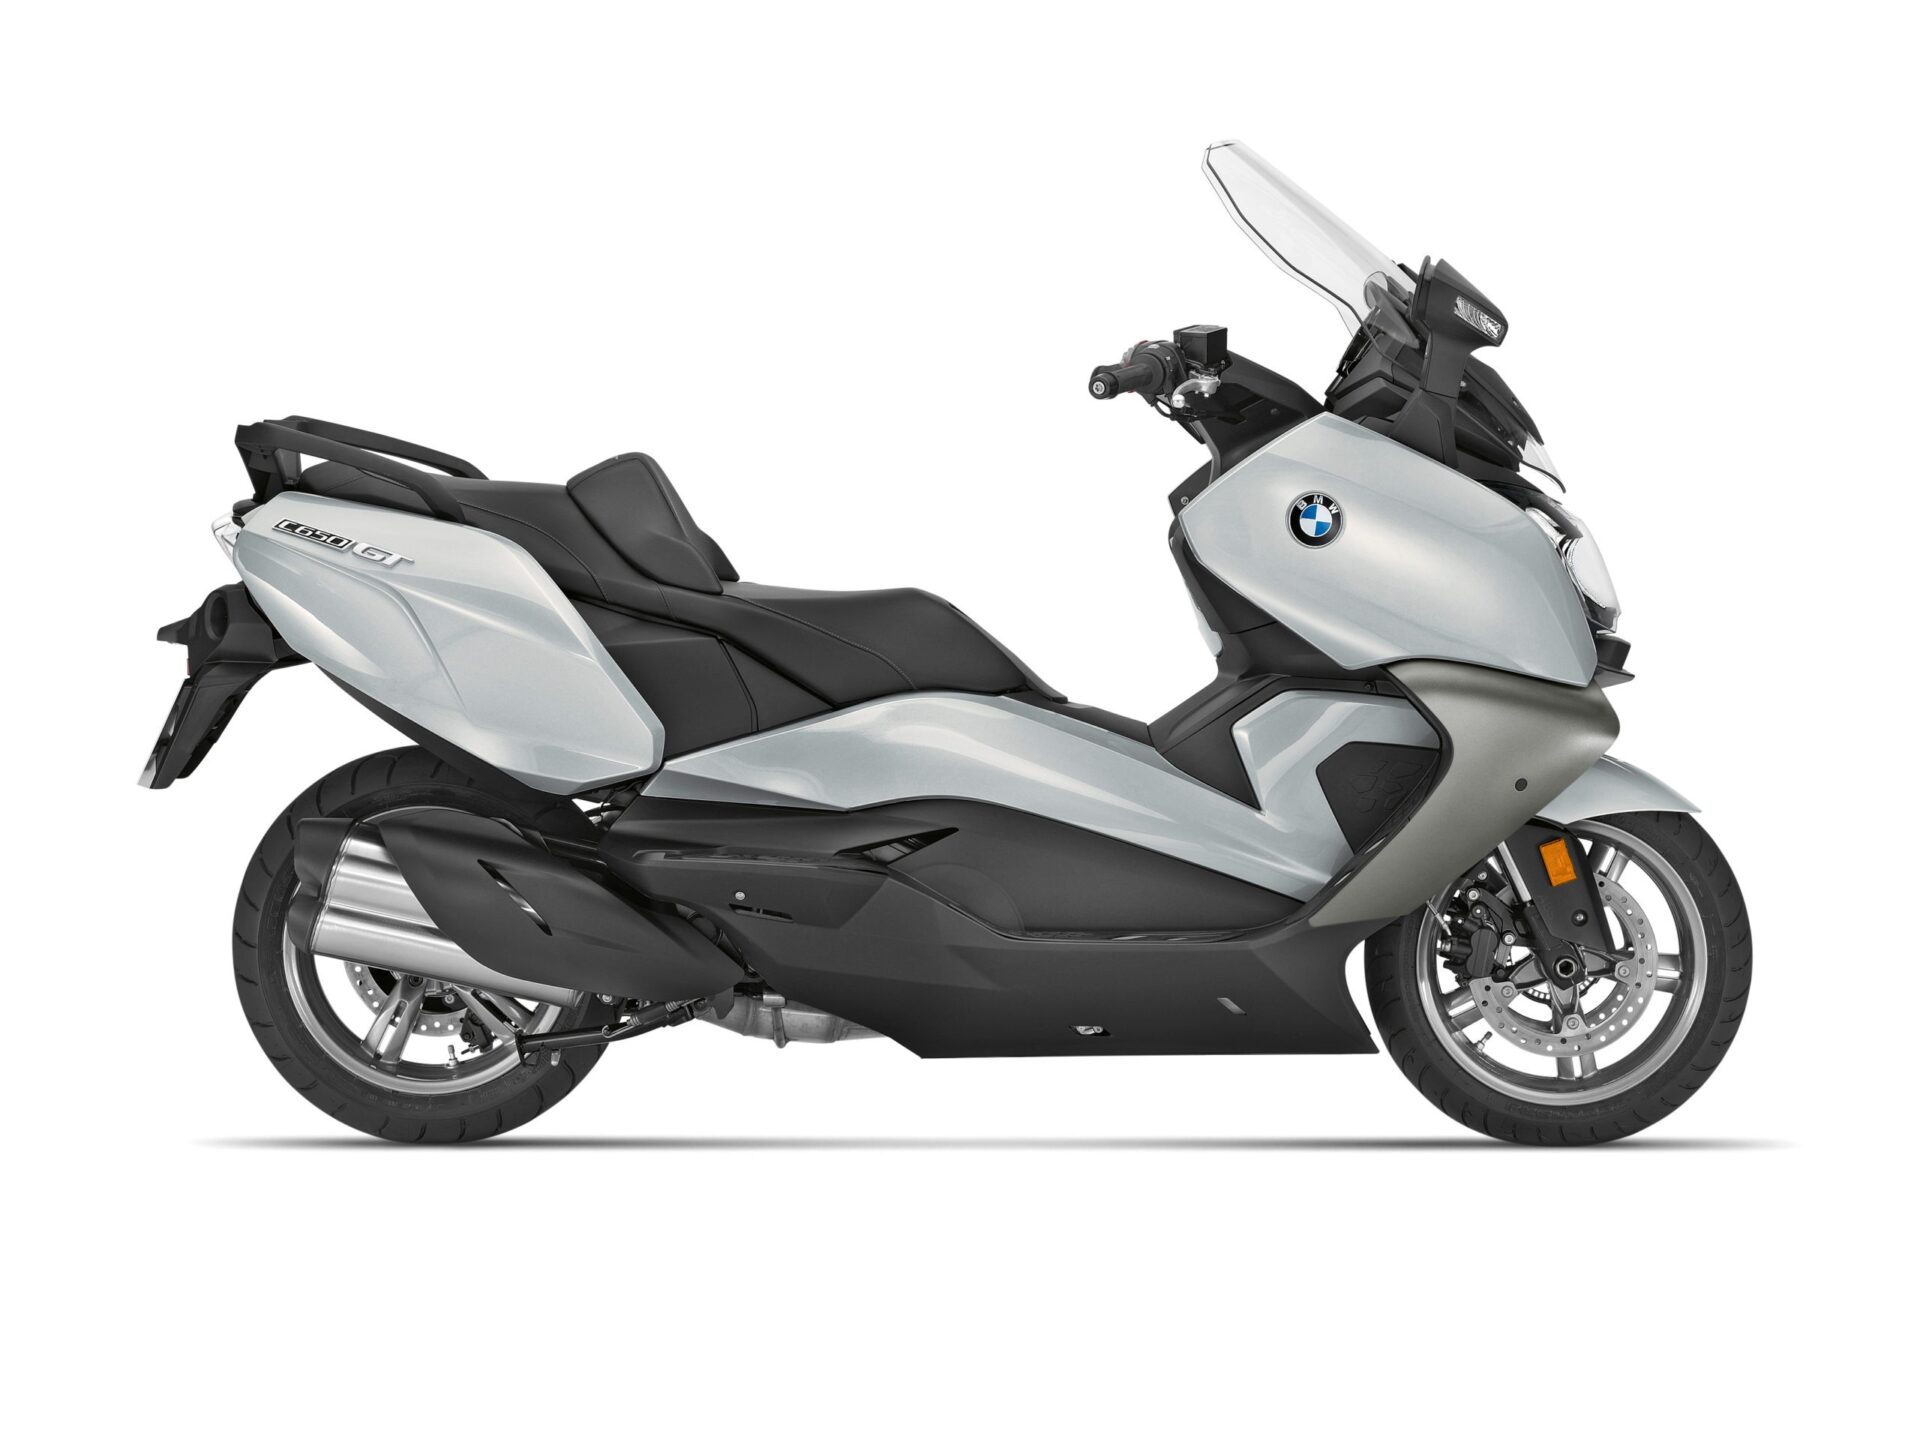 Bmw C650 Gt Rental In Marseille Ride Maxi Scooter With Road2luxe